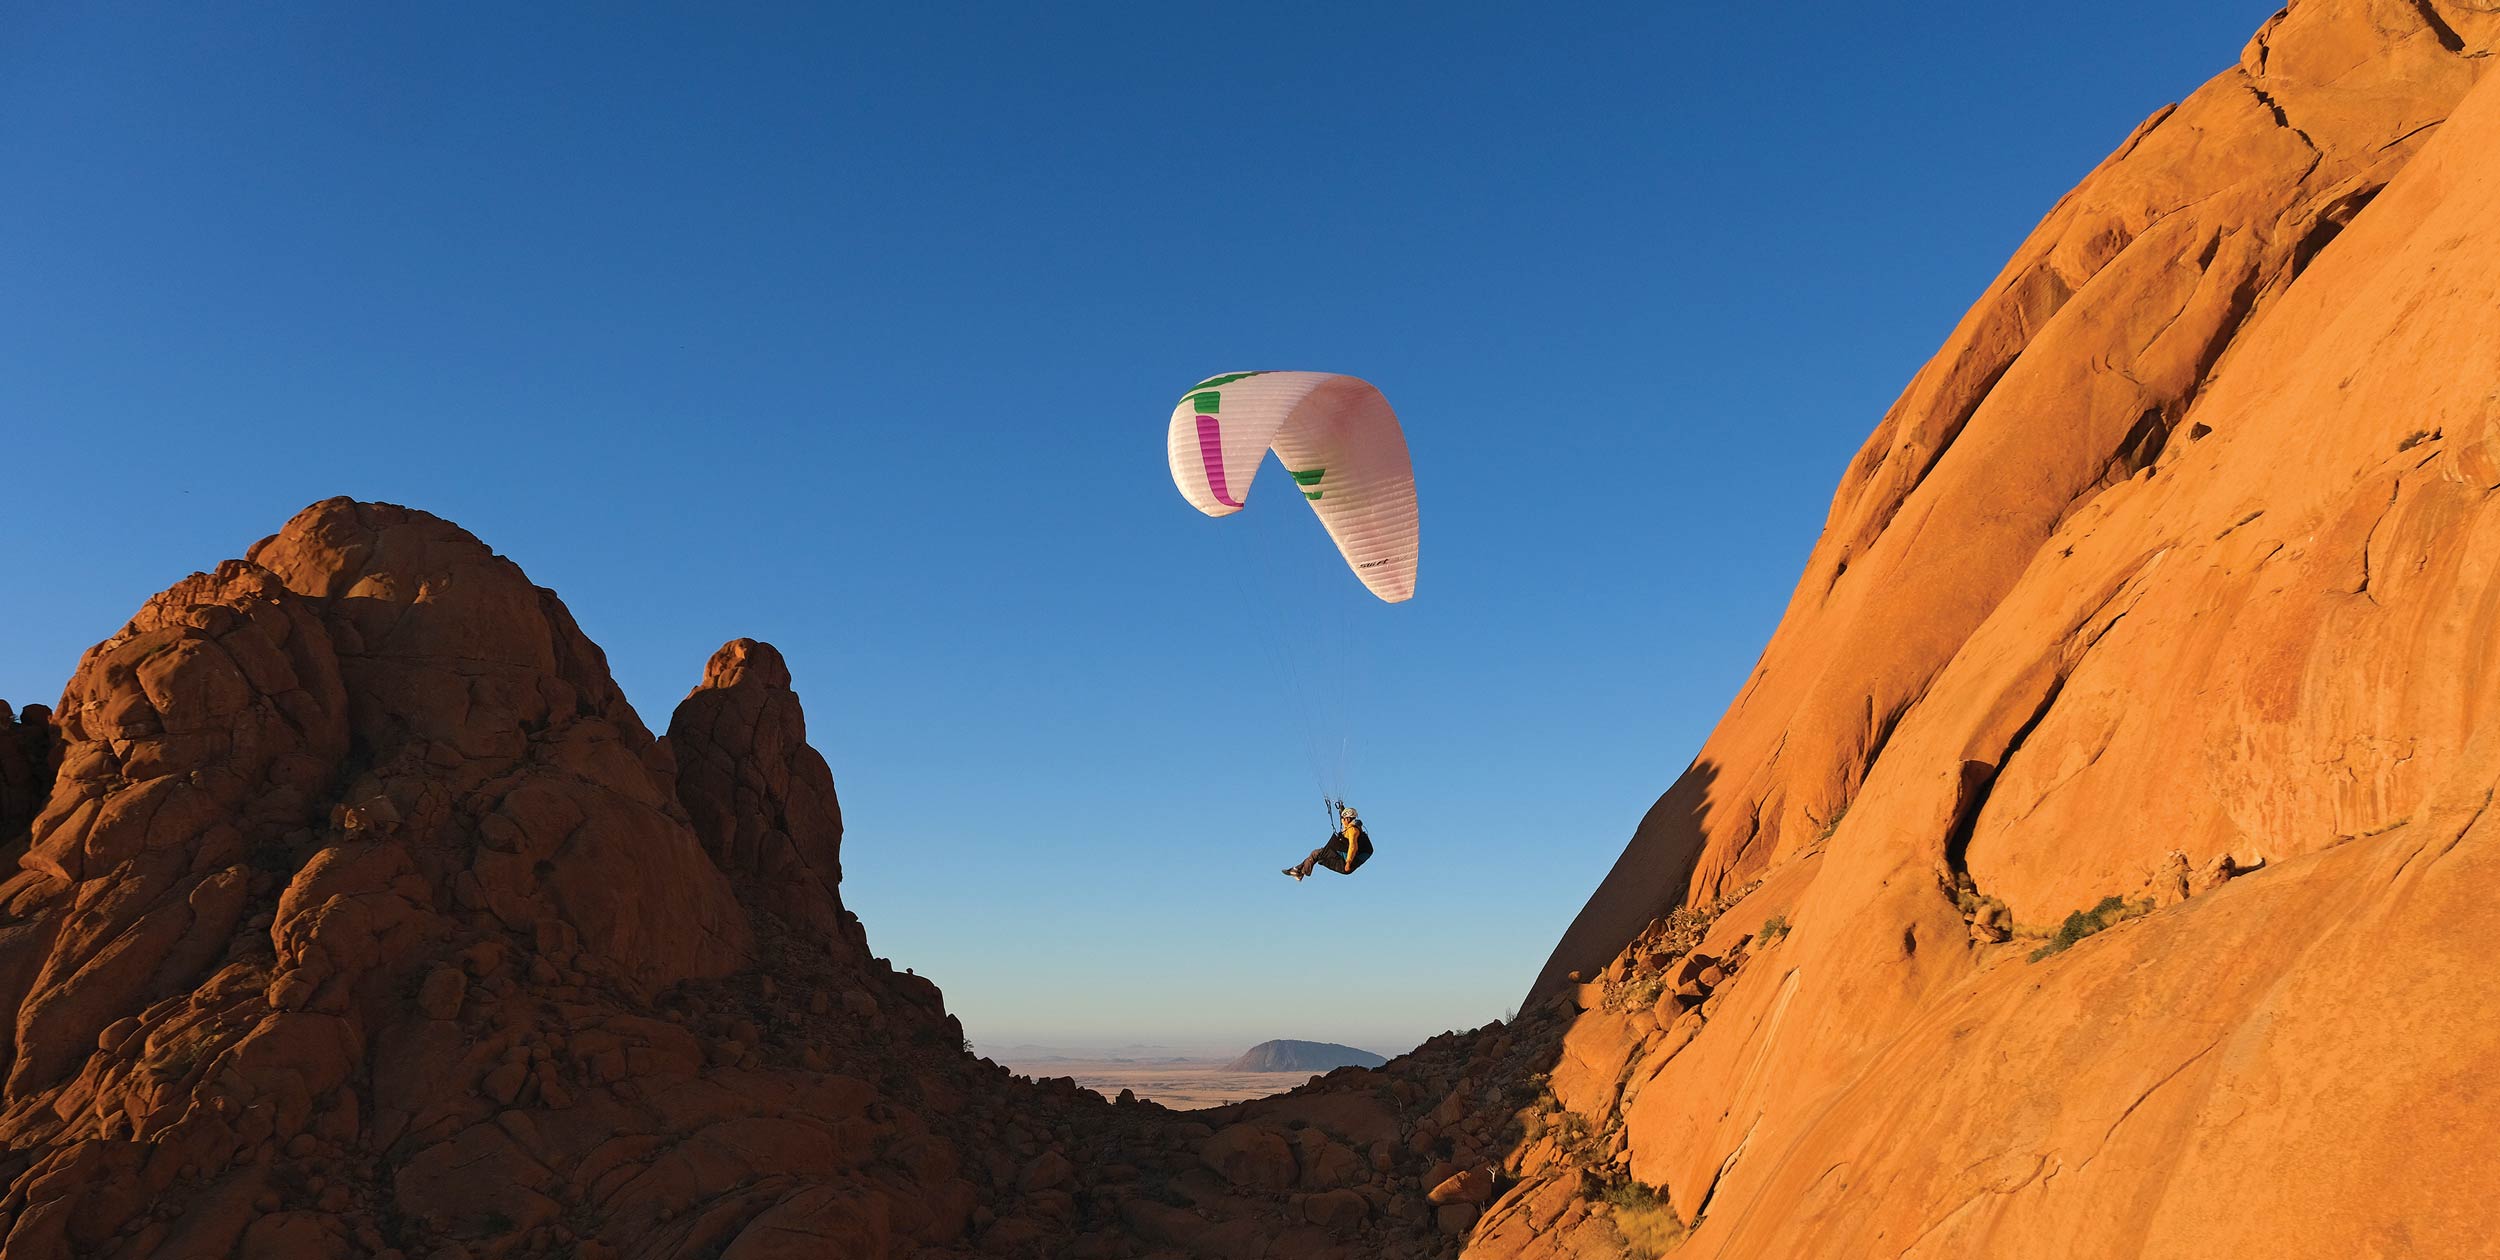 Paragliding in Namibia